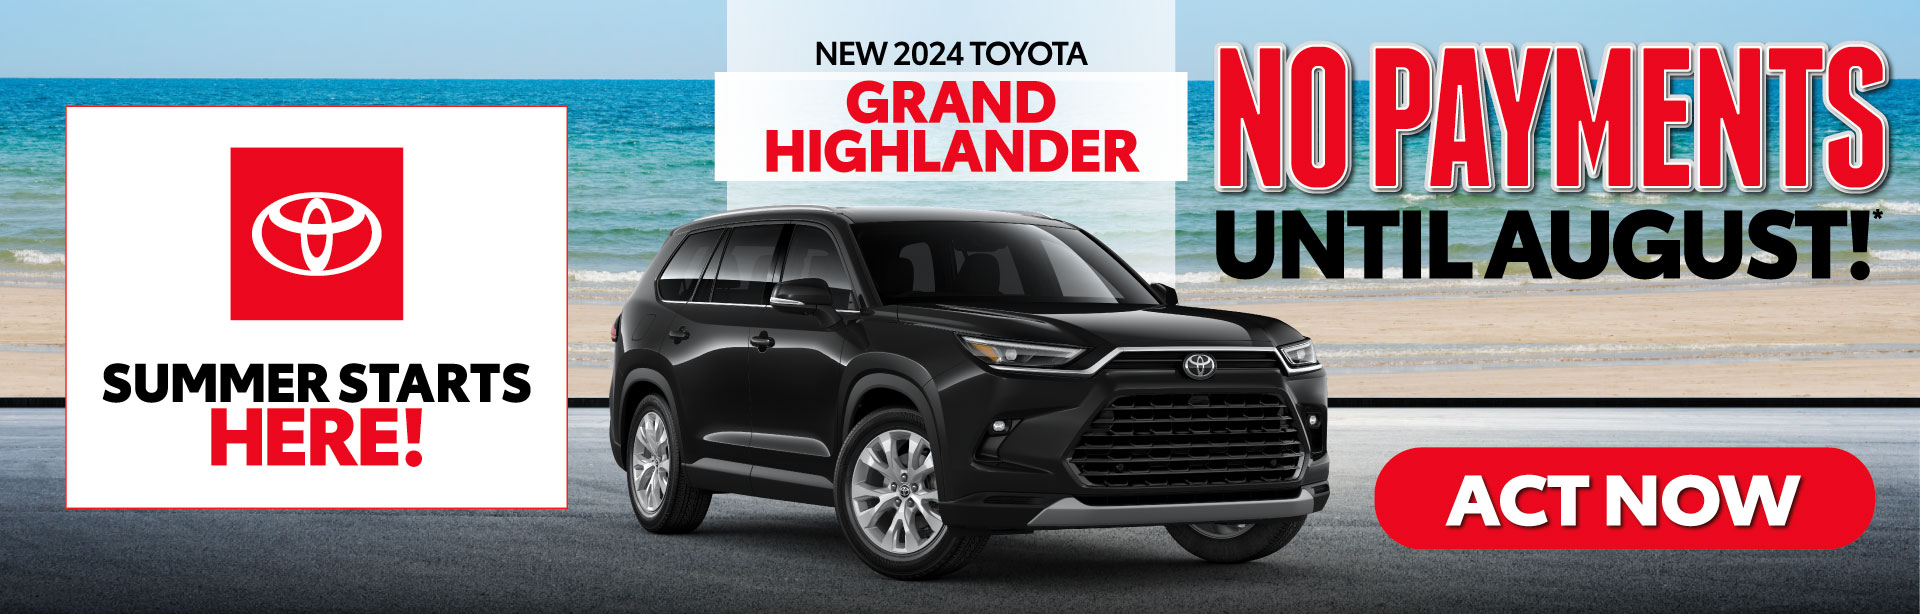 New 2024 Toyota Tundra $399 a month for 36 months* | Act Now